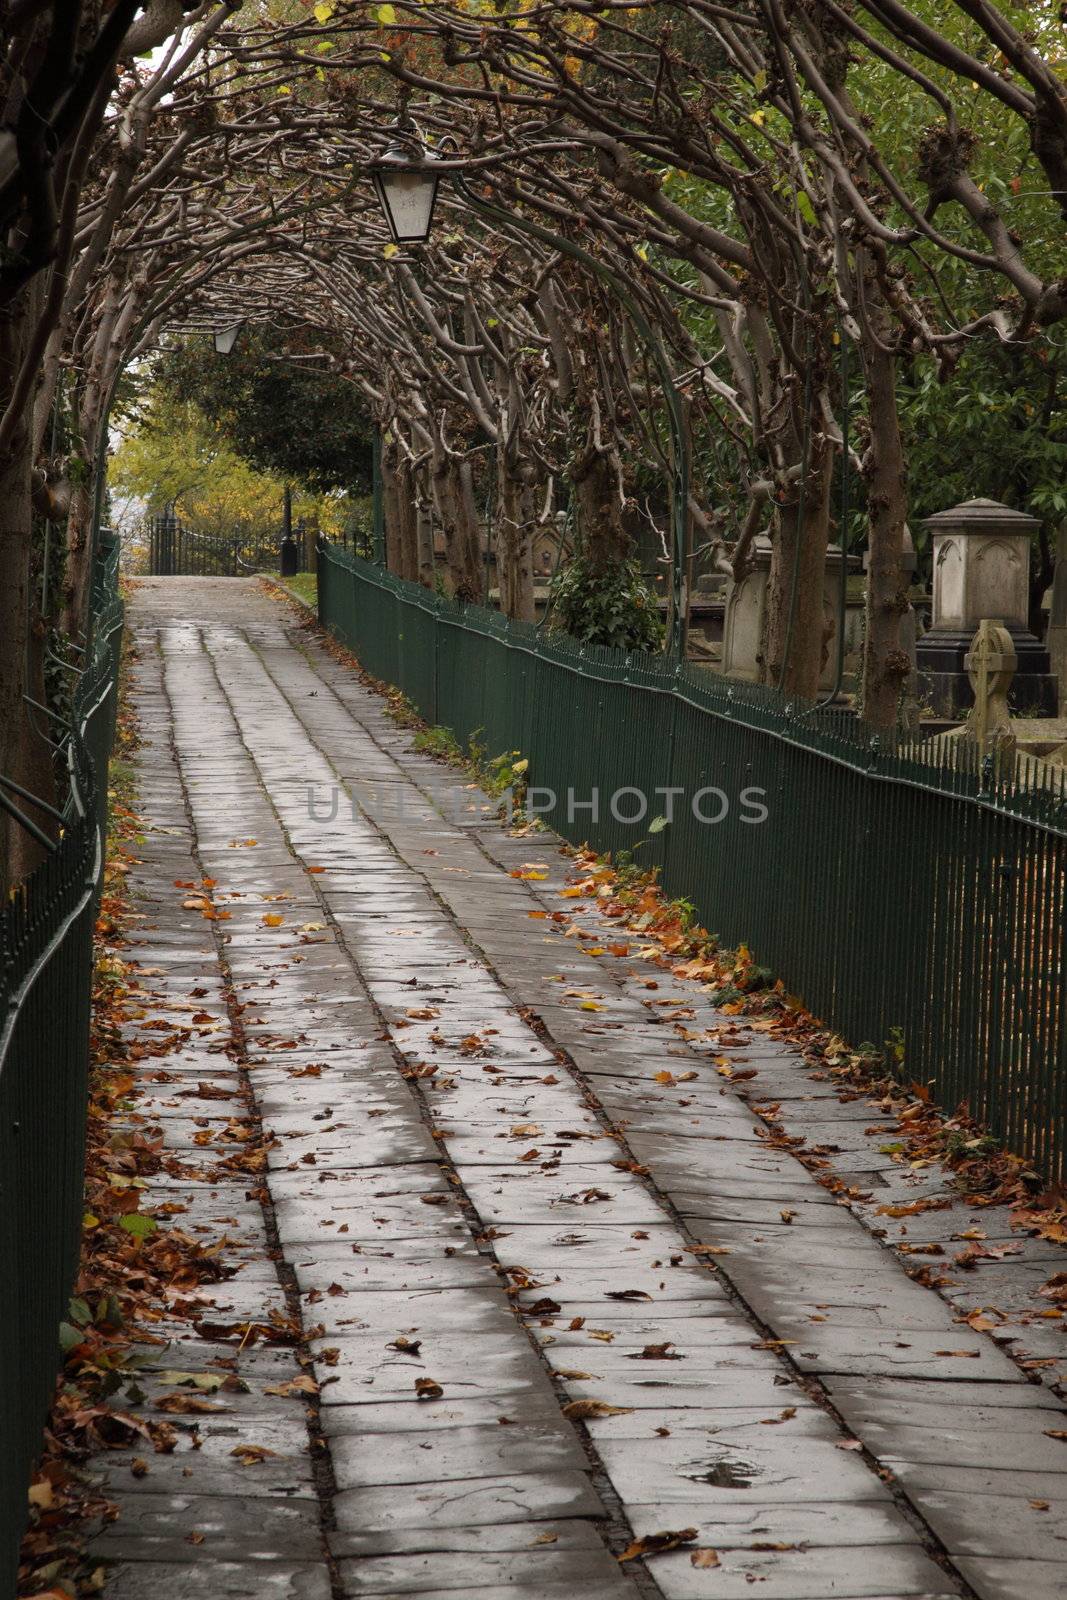 These pleached lime trees have shed their leaves on the footpath through St Andrew's churchyard in Clifton, Bristol